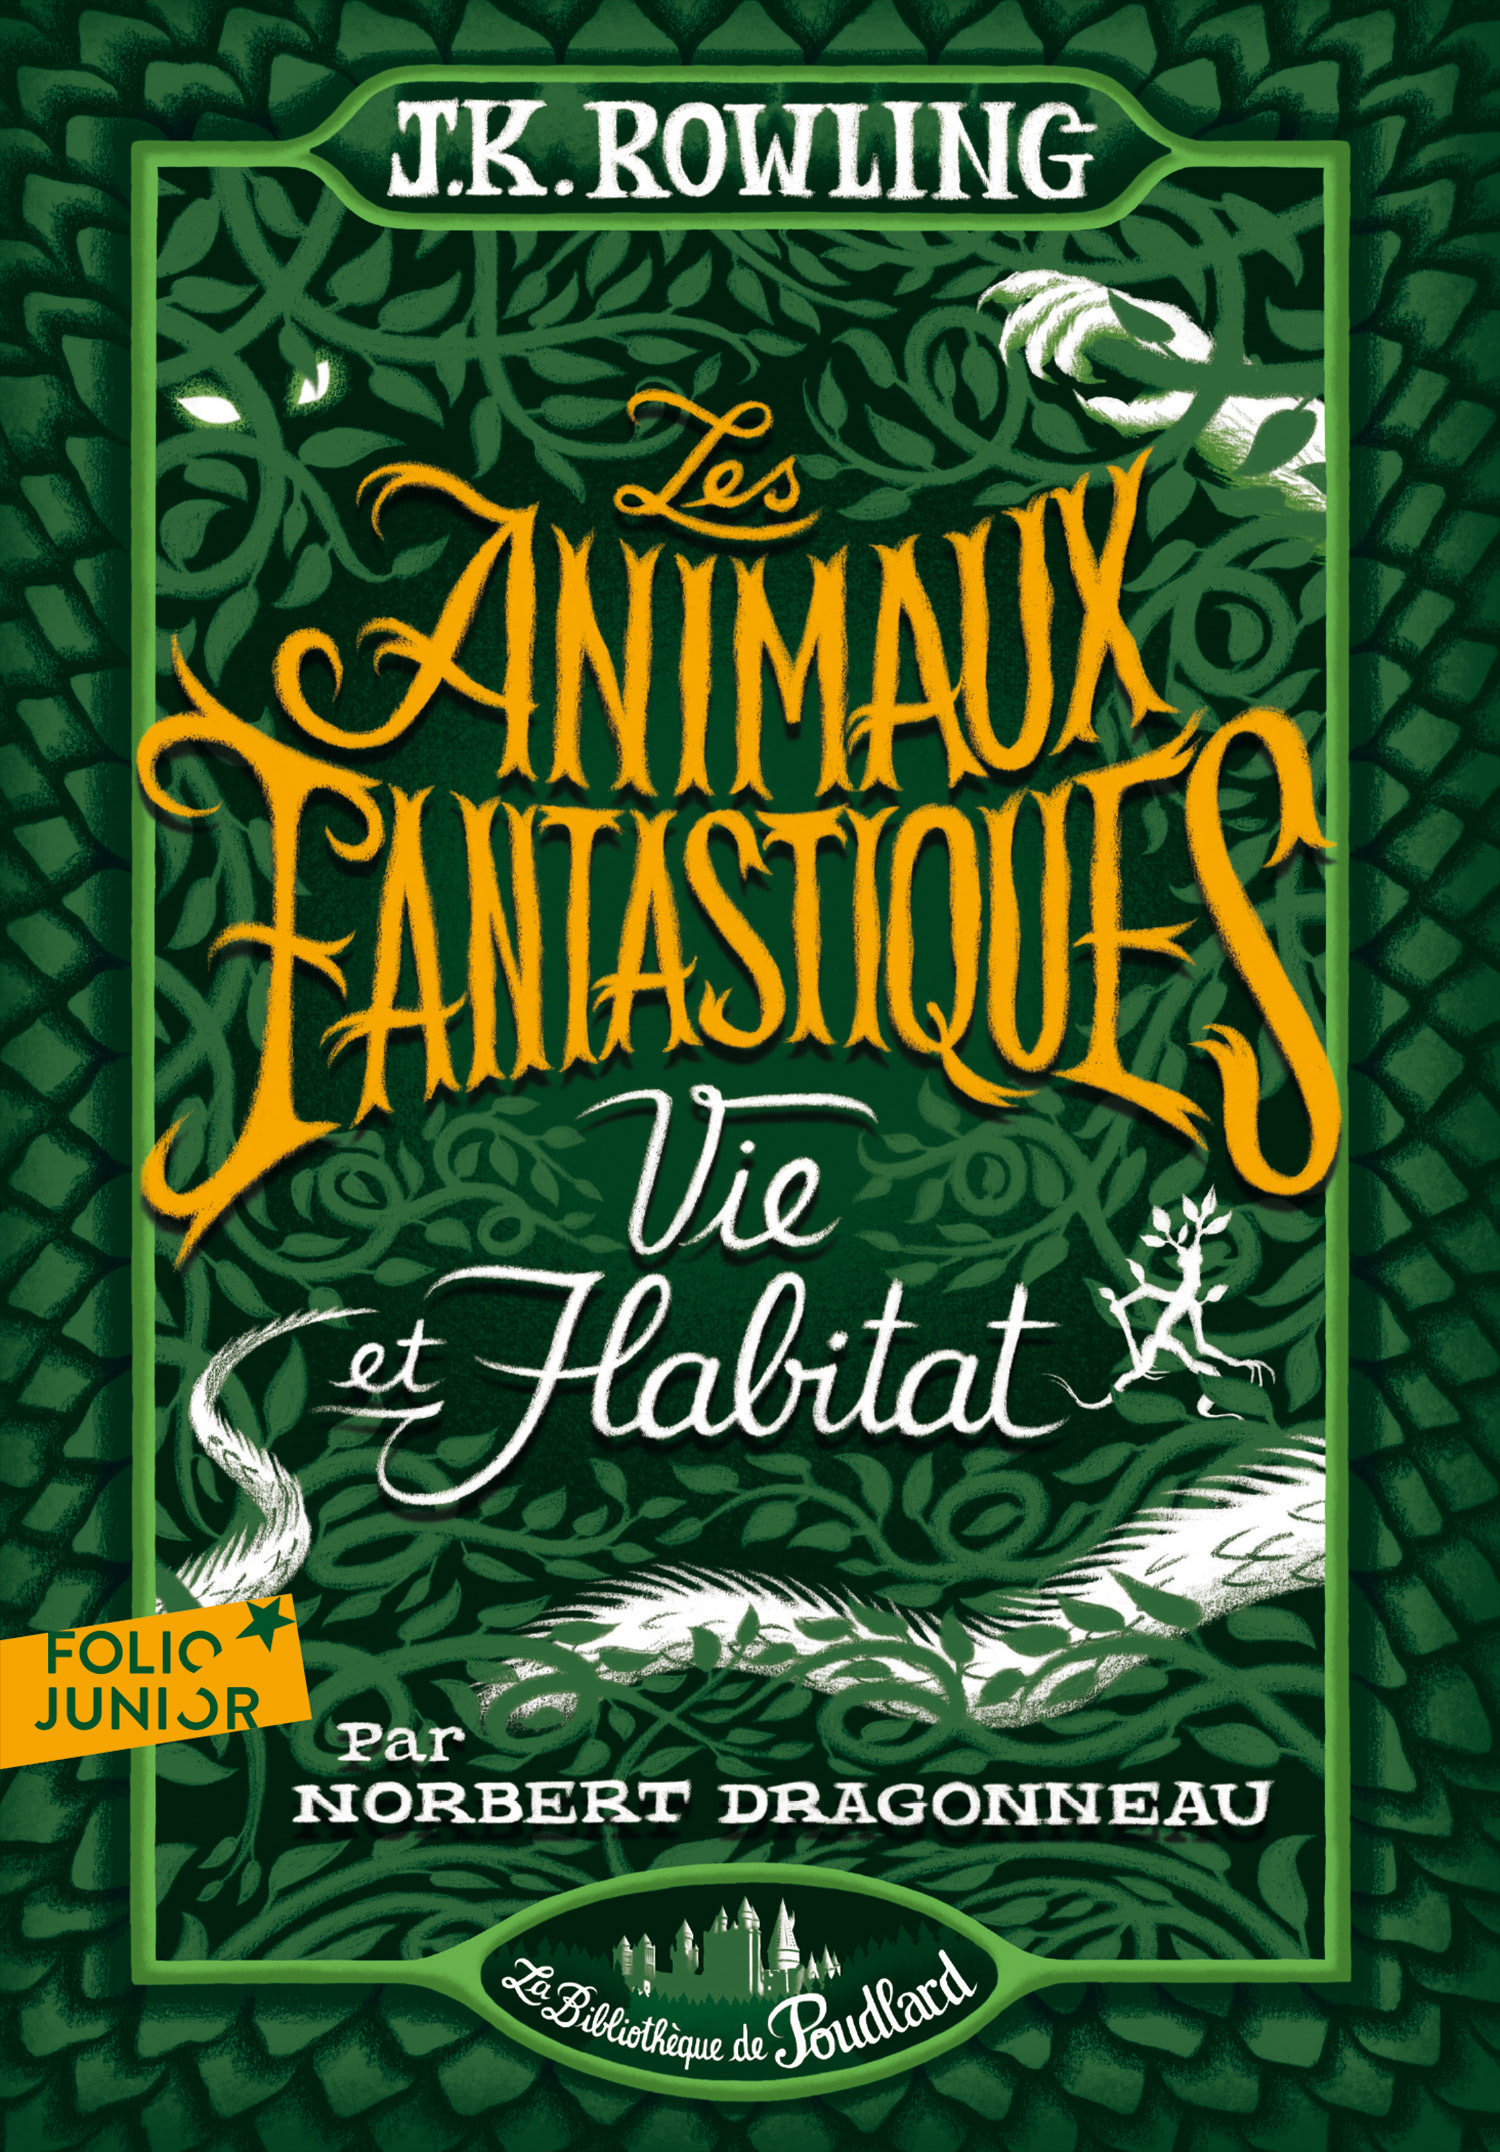 ‘Fantastic Beasts and Where to Find Them’ French edition